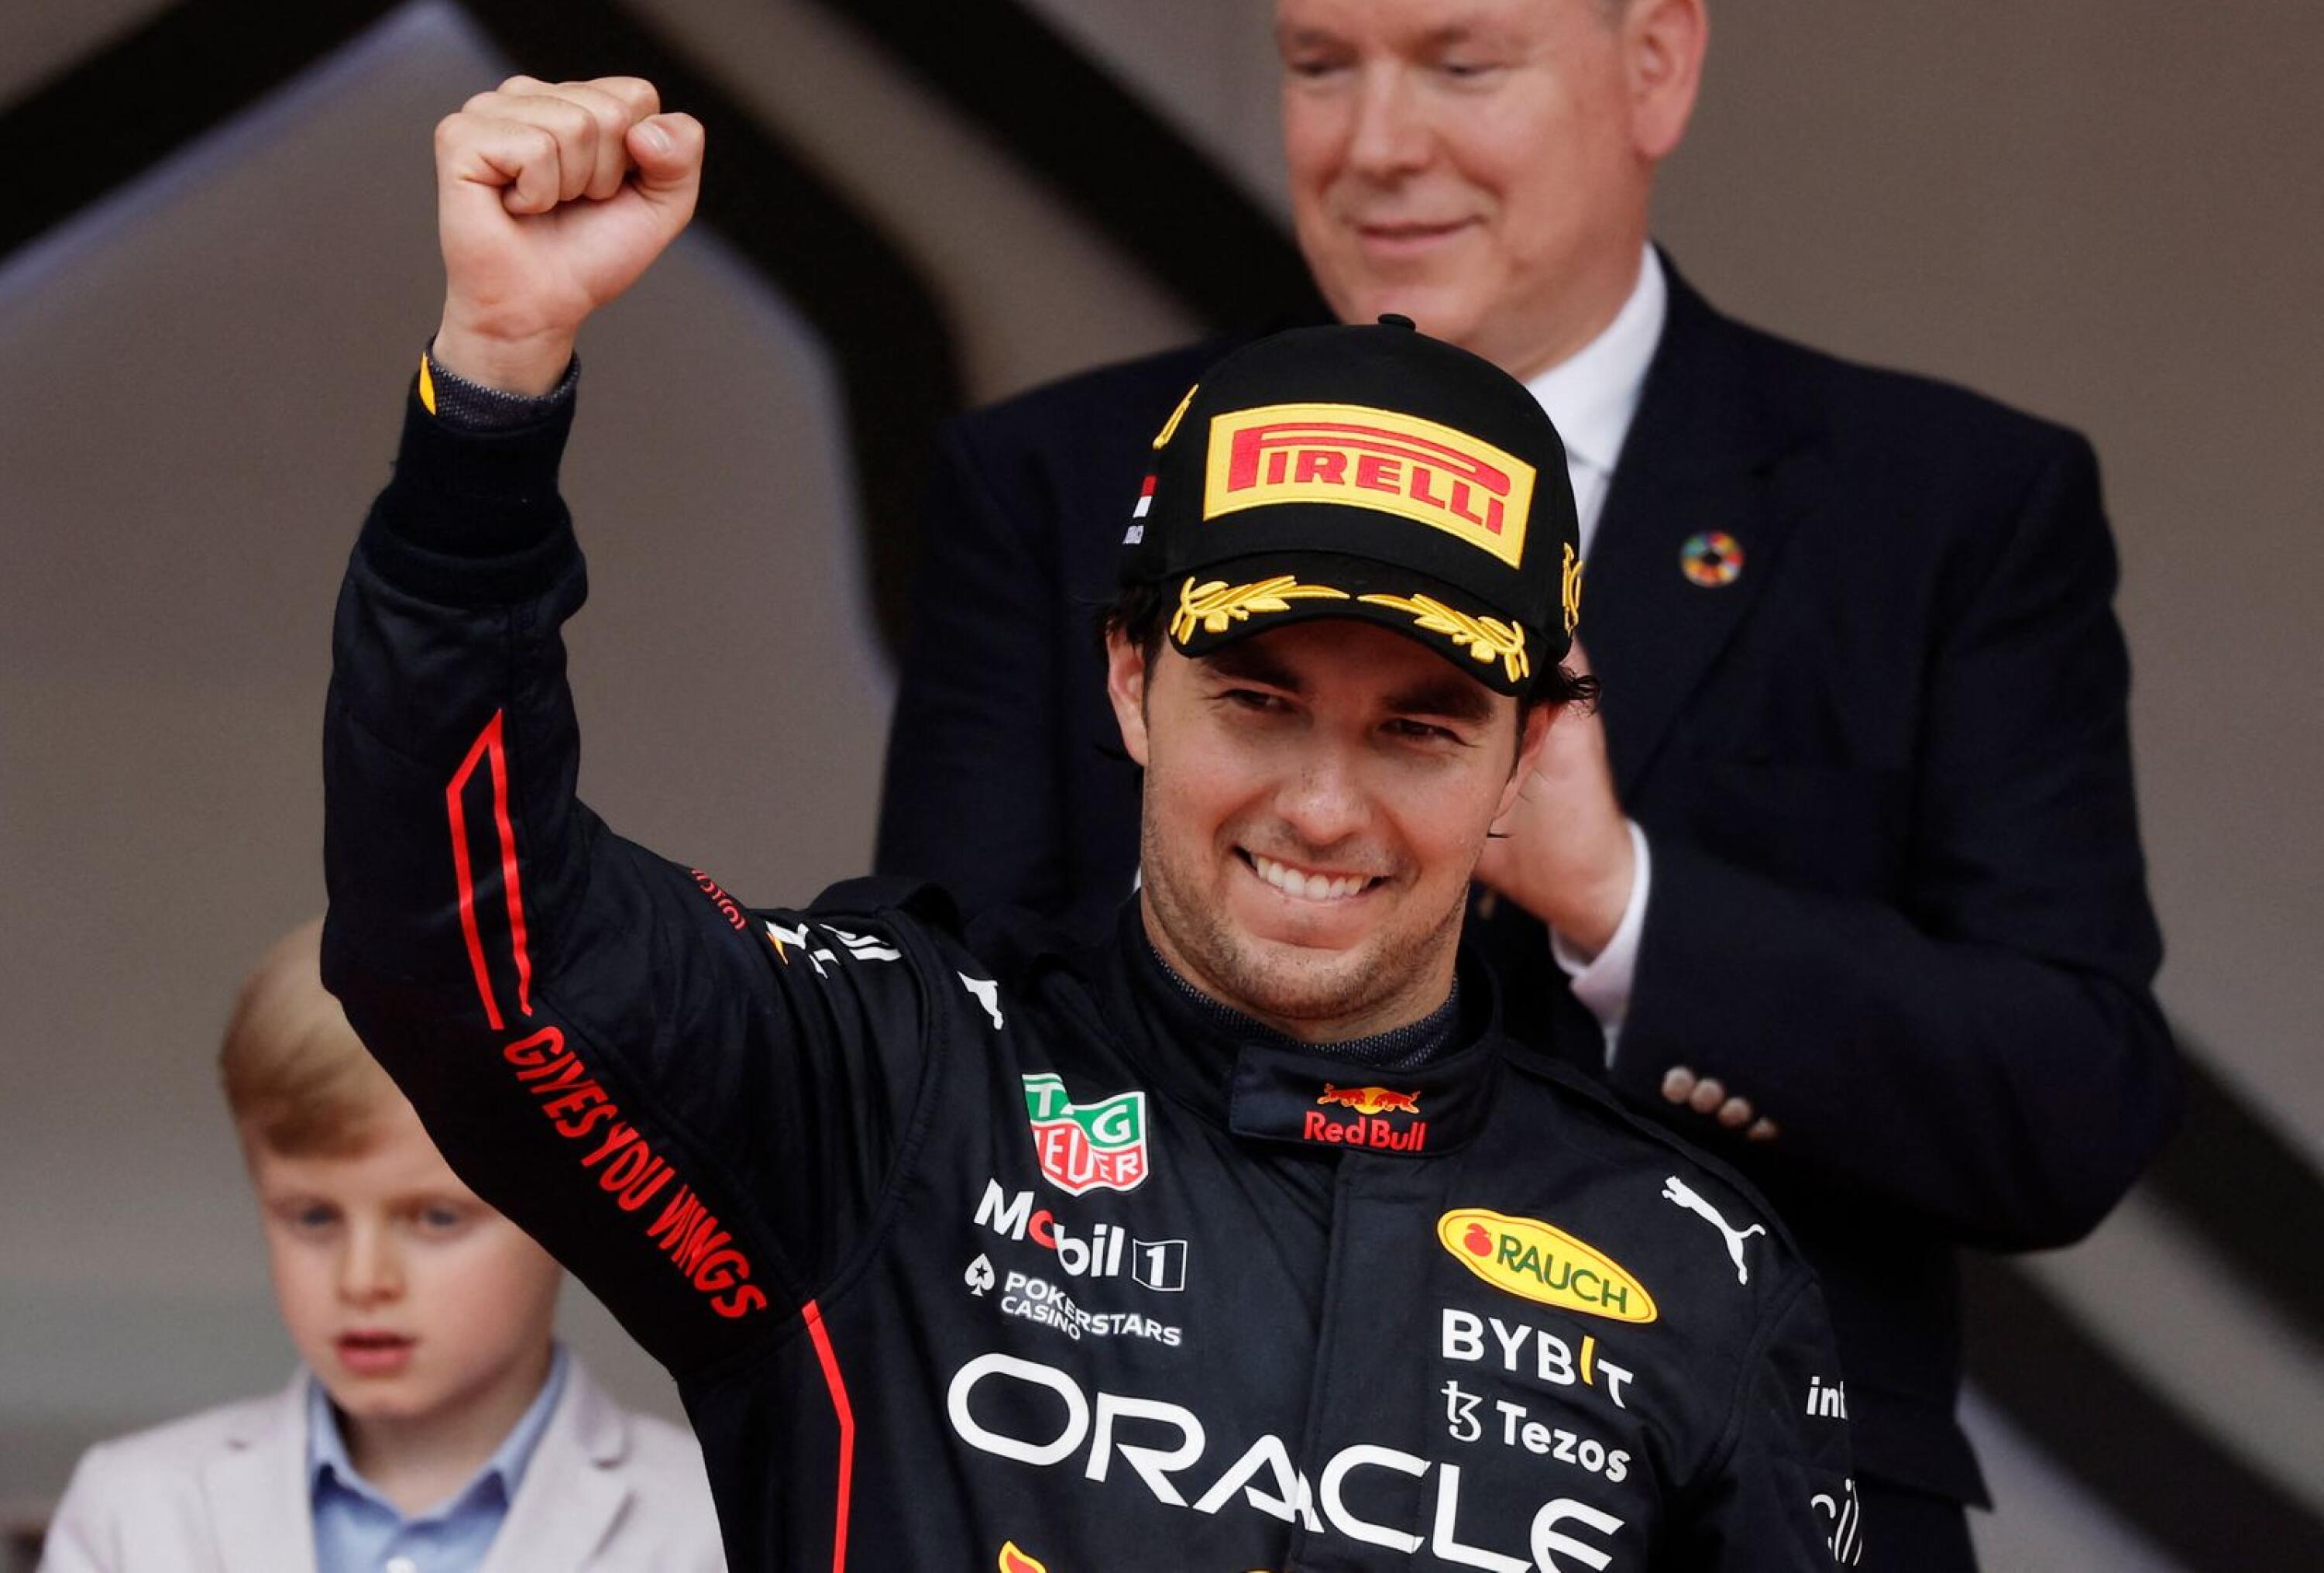 Red Bull's Sergio Perez celebrates on the podium after winning the race as Prince Albert II of Monaco applauds